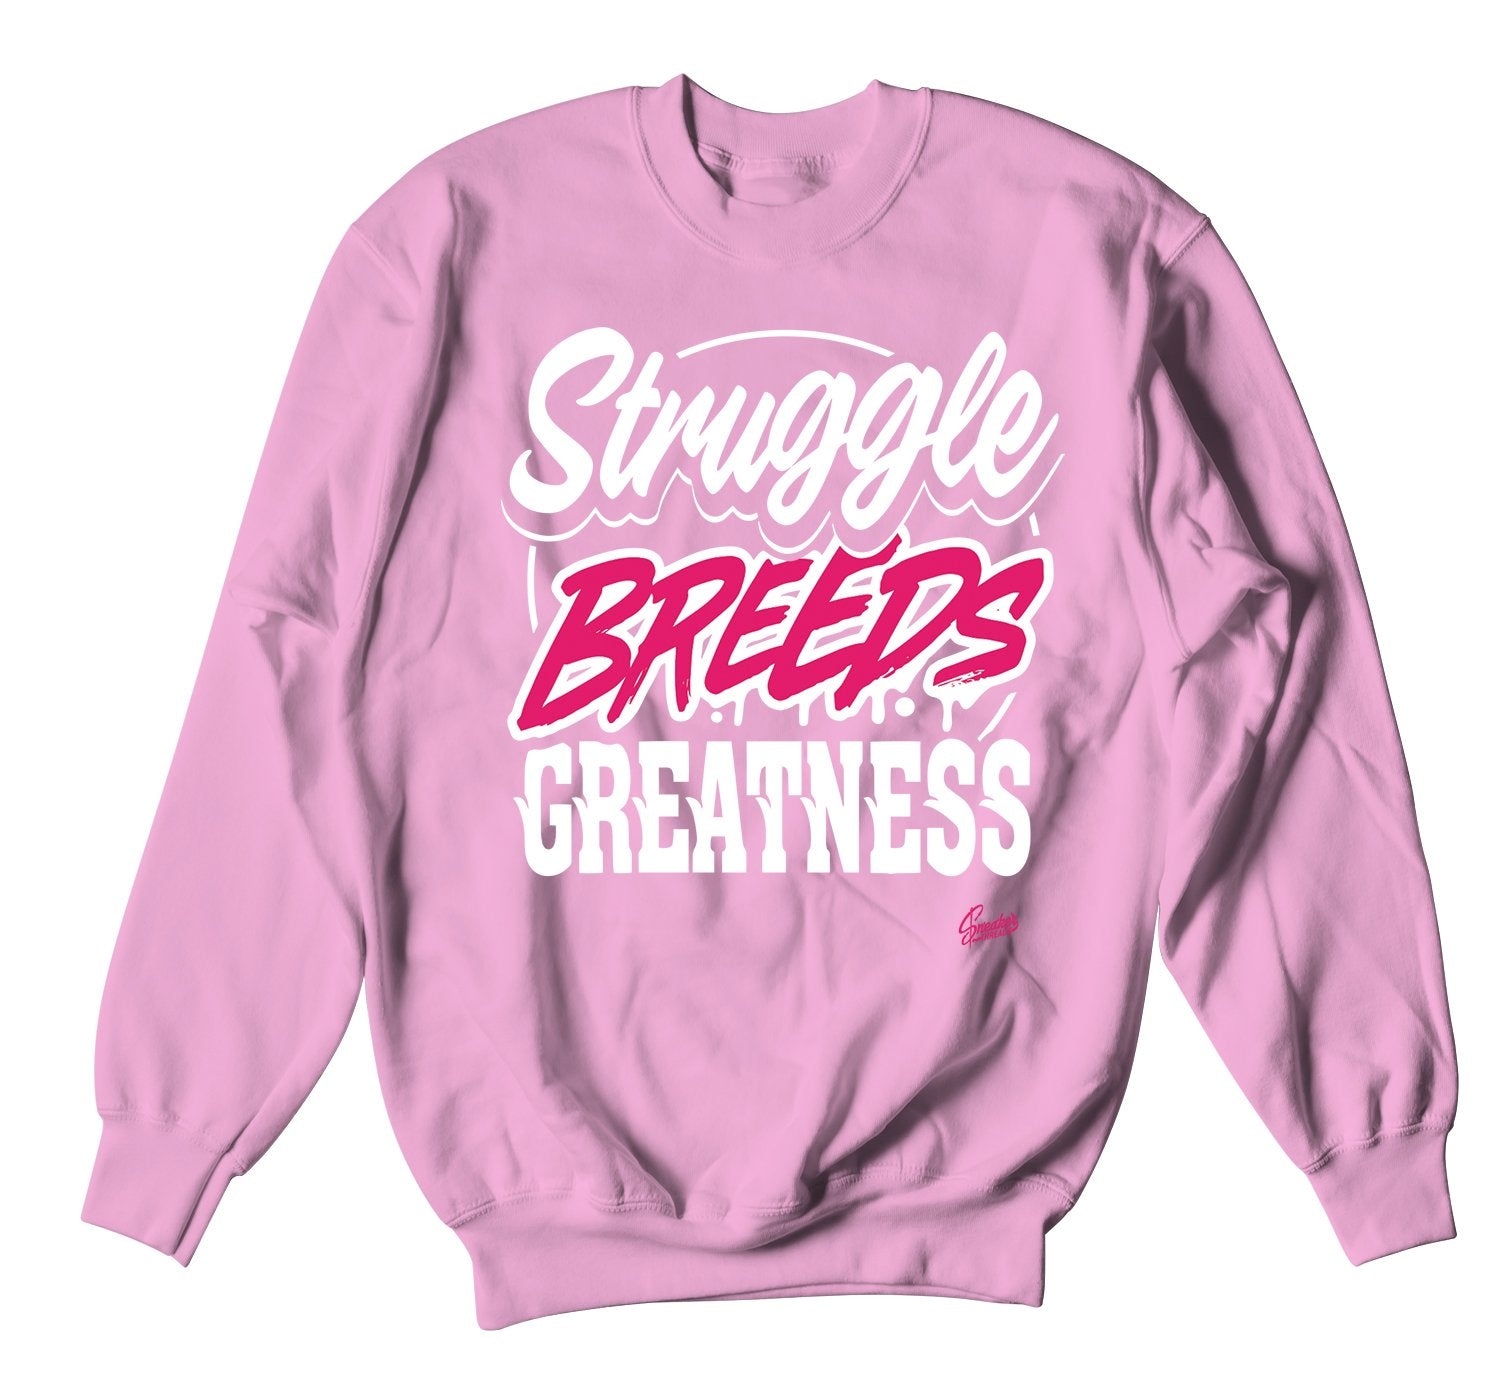 crewneck sweater collection designed to match the sneaker collection kd aunt pearl 12s